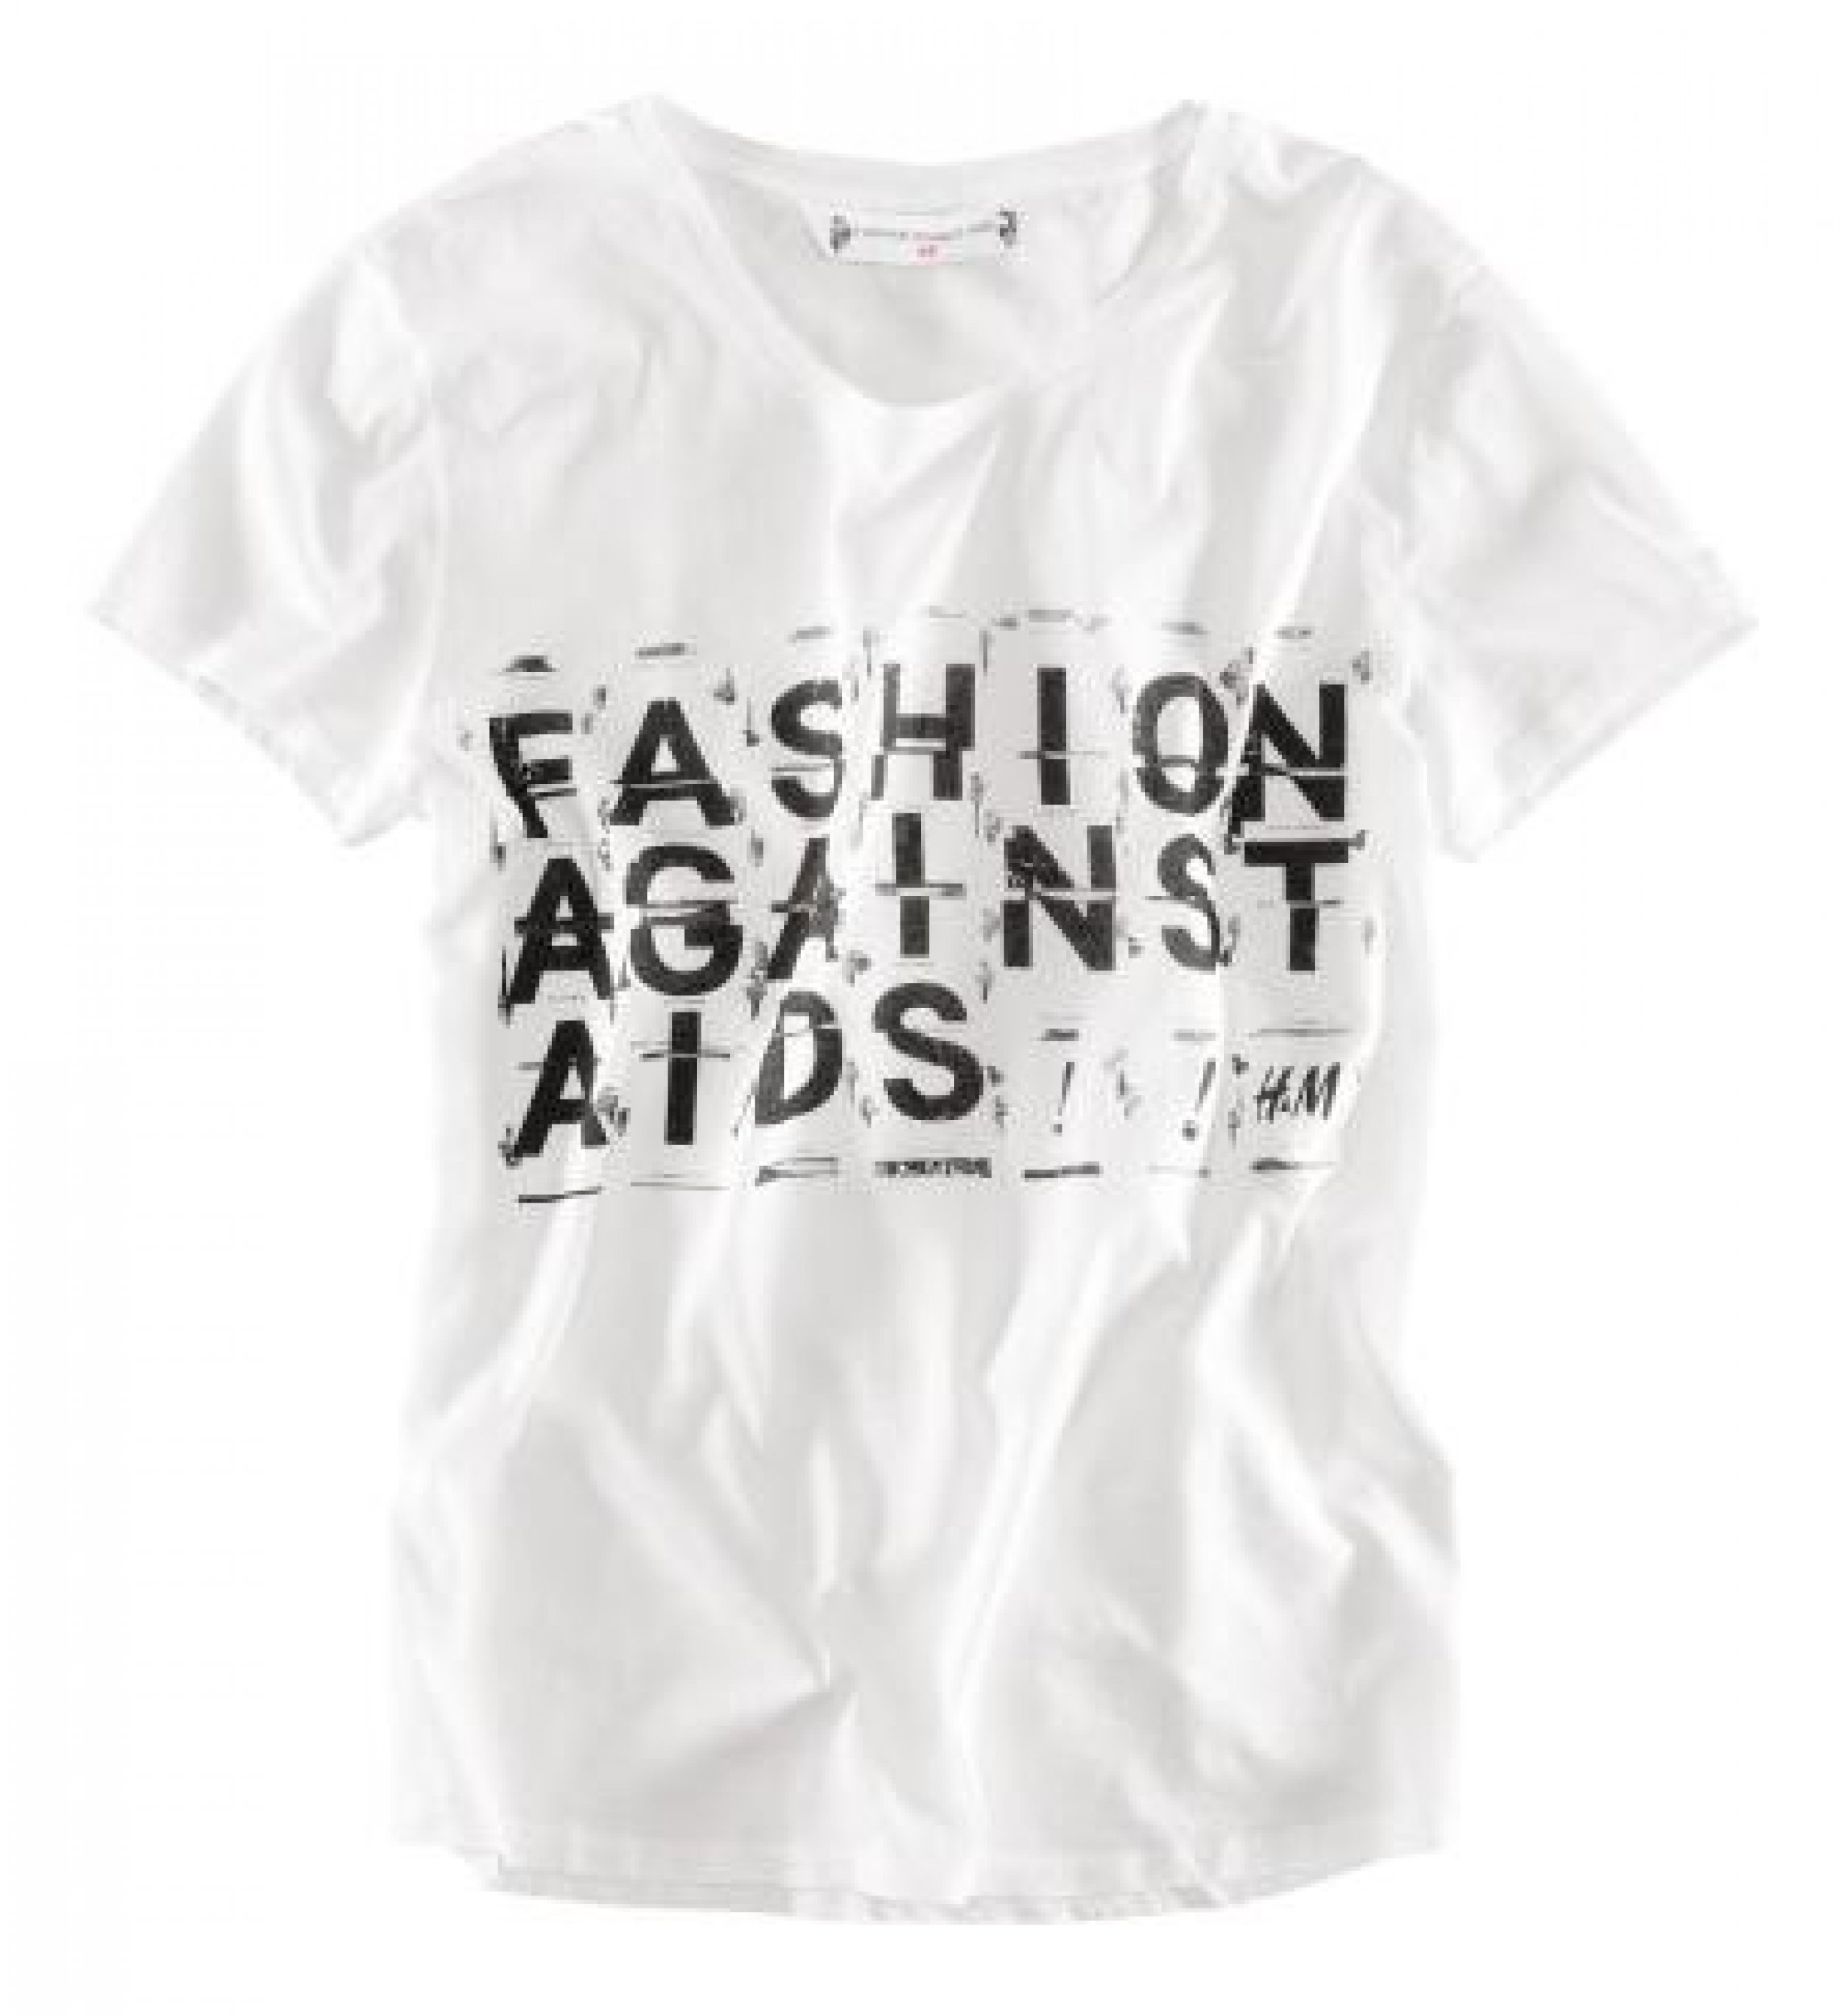 First Look HM Launches Its 5th Fashion against AIDS Collection 